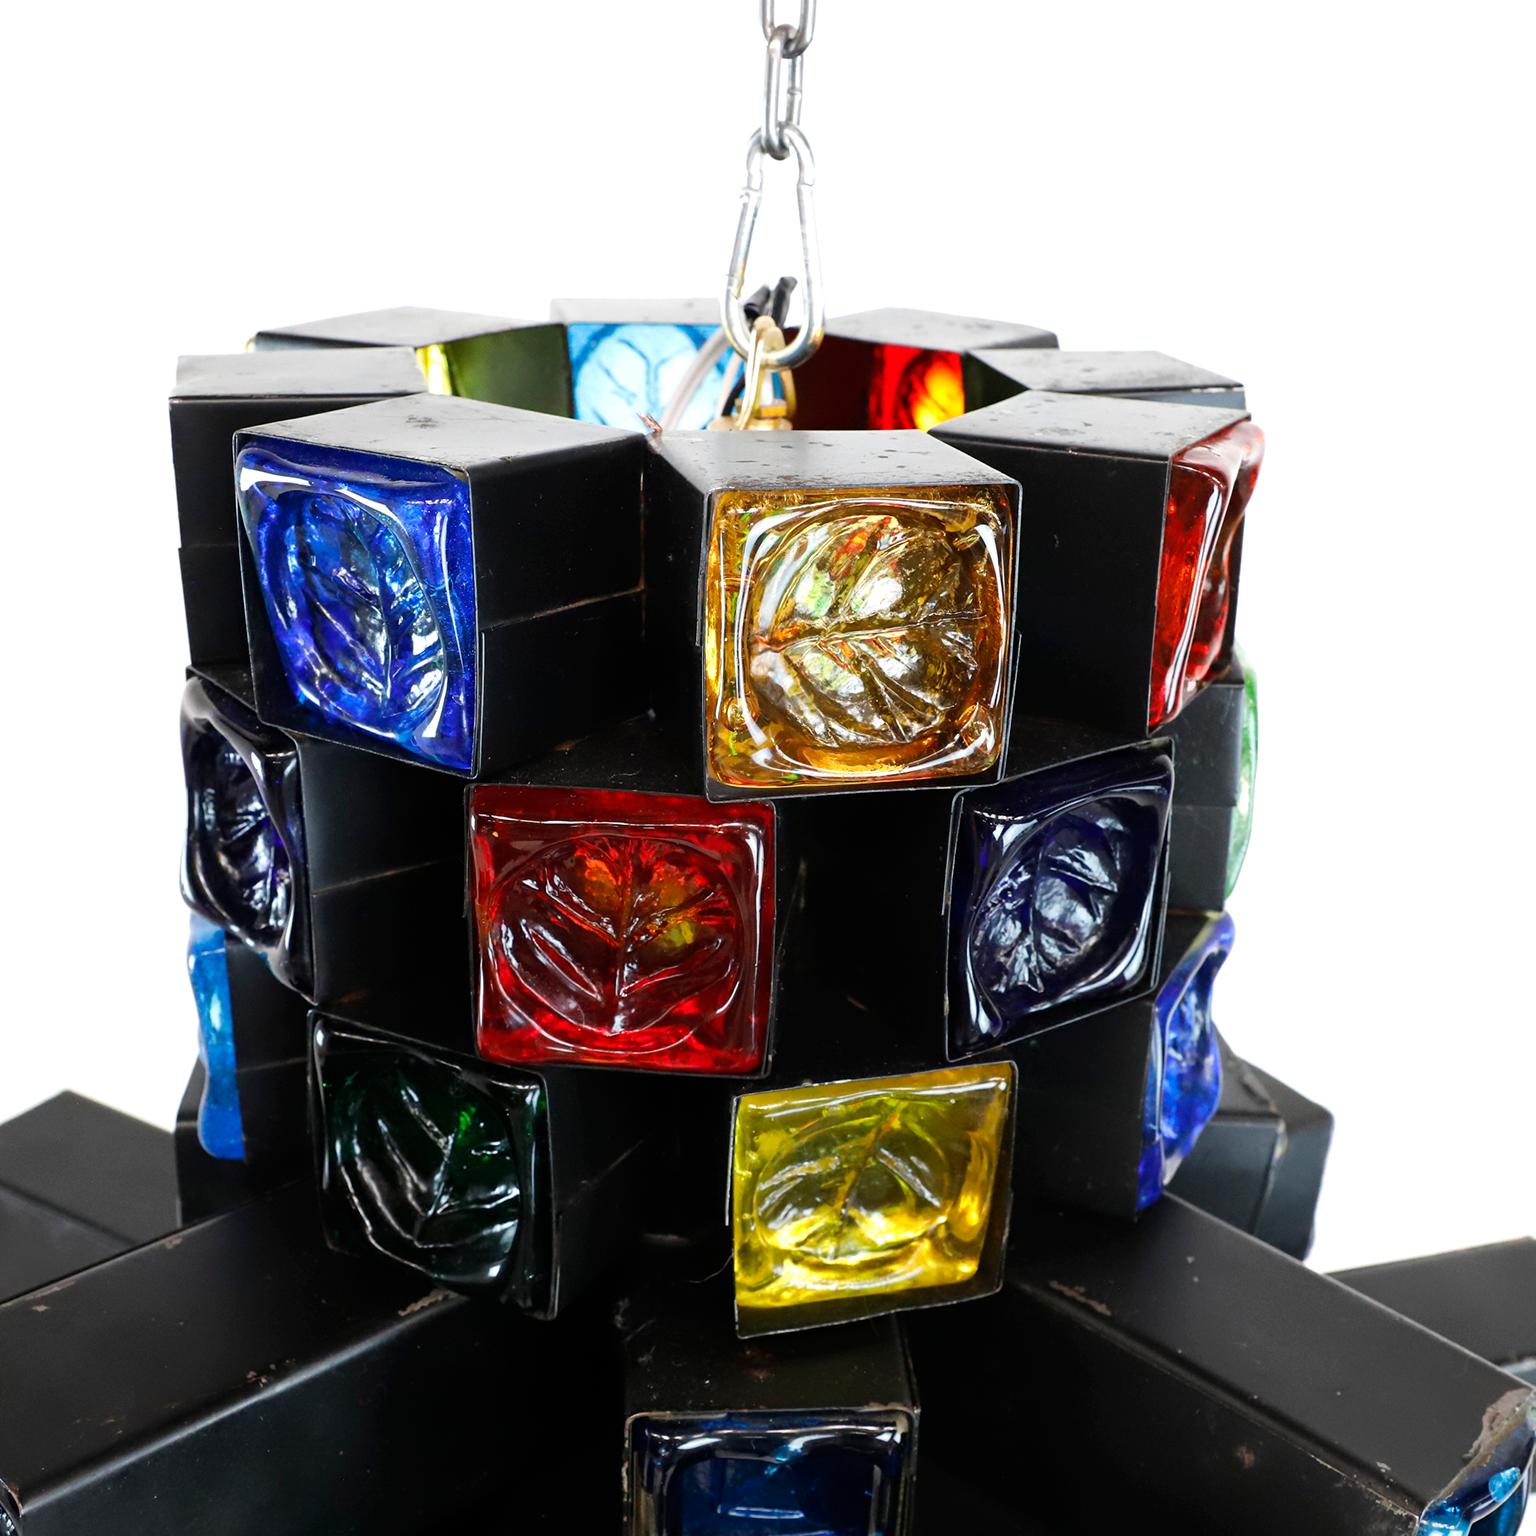 This chandelier is one of the most stunning samples of Brutalist art, made of steel and multicolored blown glass, each cube is handwrought in steel which cradles the thick sculptured glass, circa 1970, totally rewired and original porcelain sockets.